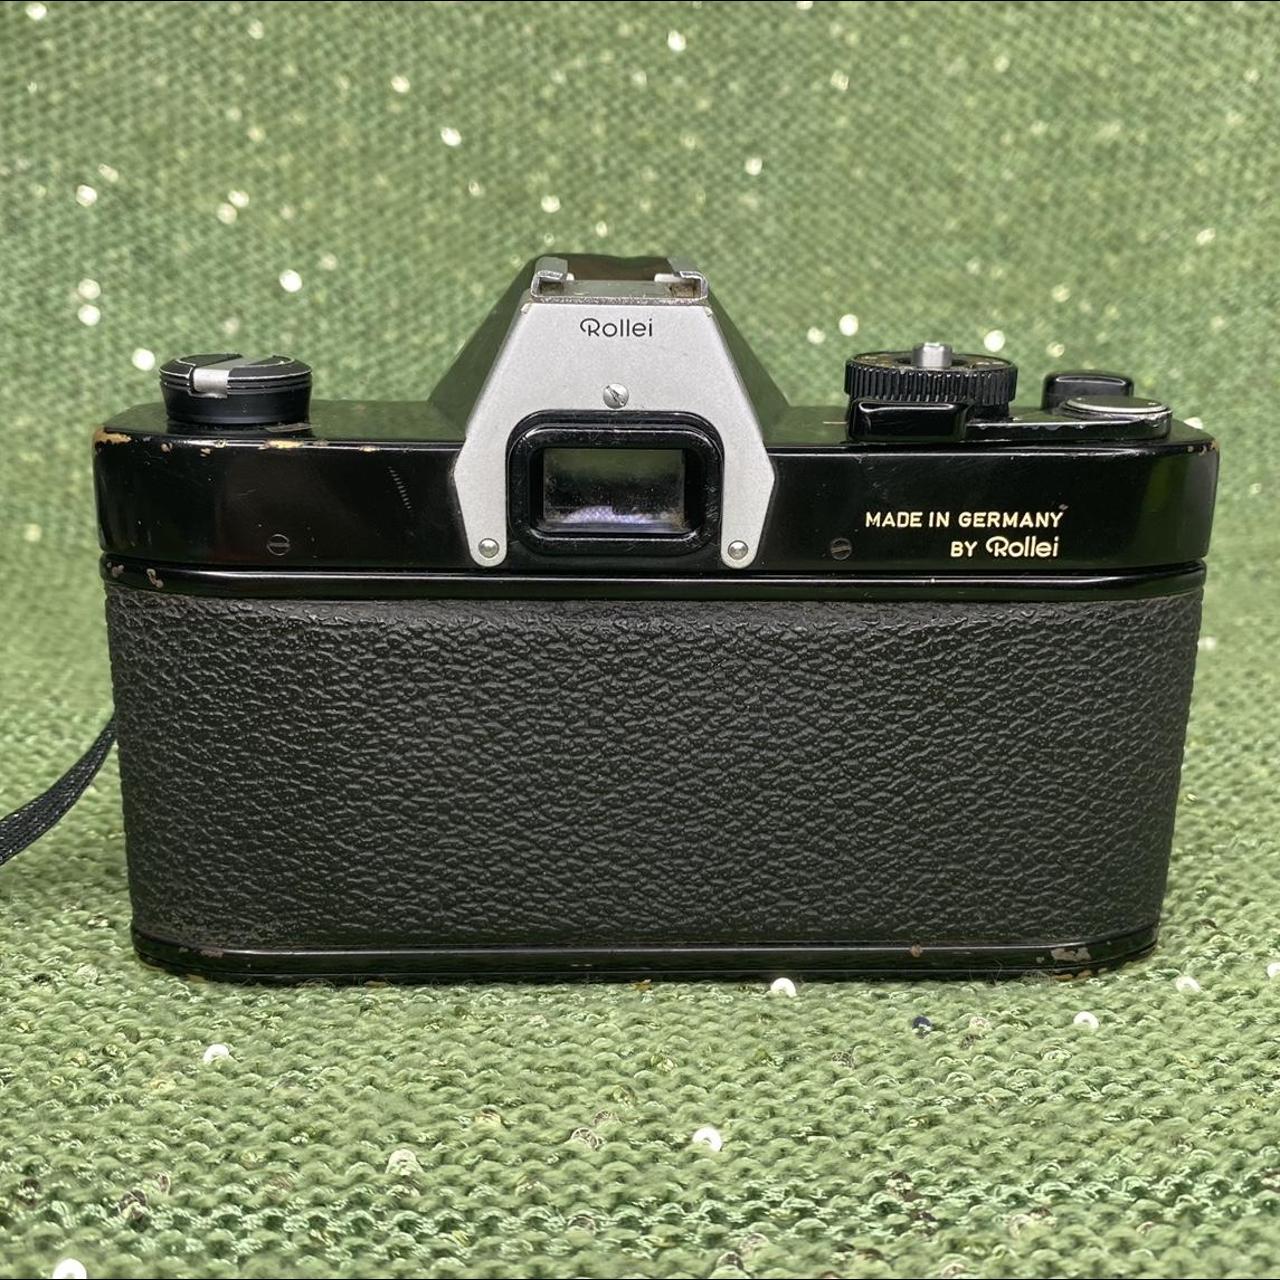 Product Image 2 - Rolleiflex SL35 Film Camera with